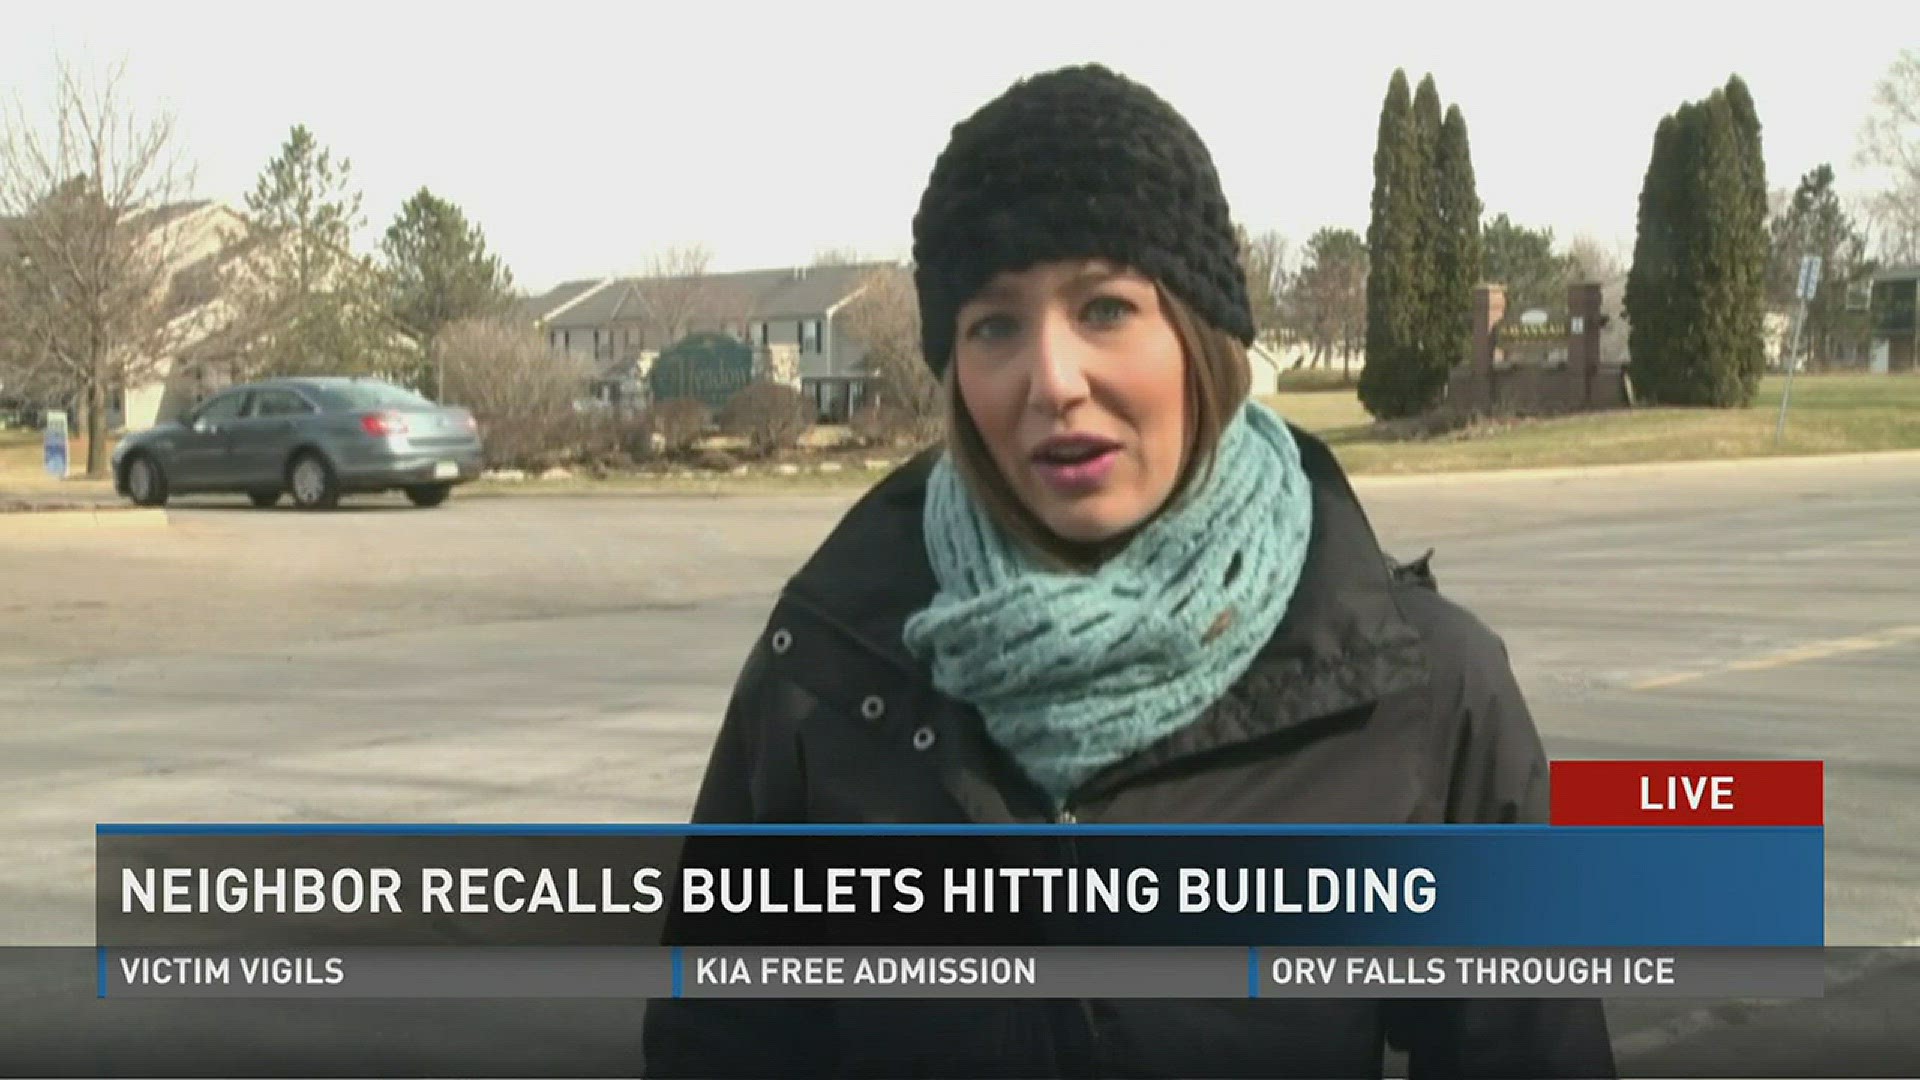 14-year-old victim continues recovery, man mourns the death of wife & sister-in-law, neighbor recalls bullets hitting building, vigils for victims tonight and Kalamazoo Institute of Arts offers free admission